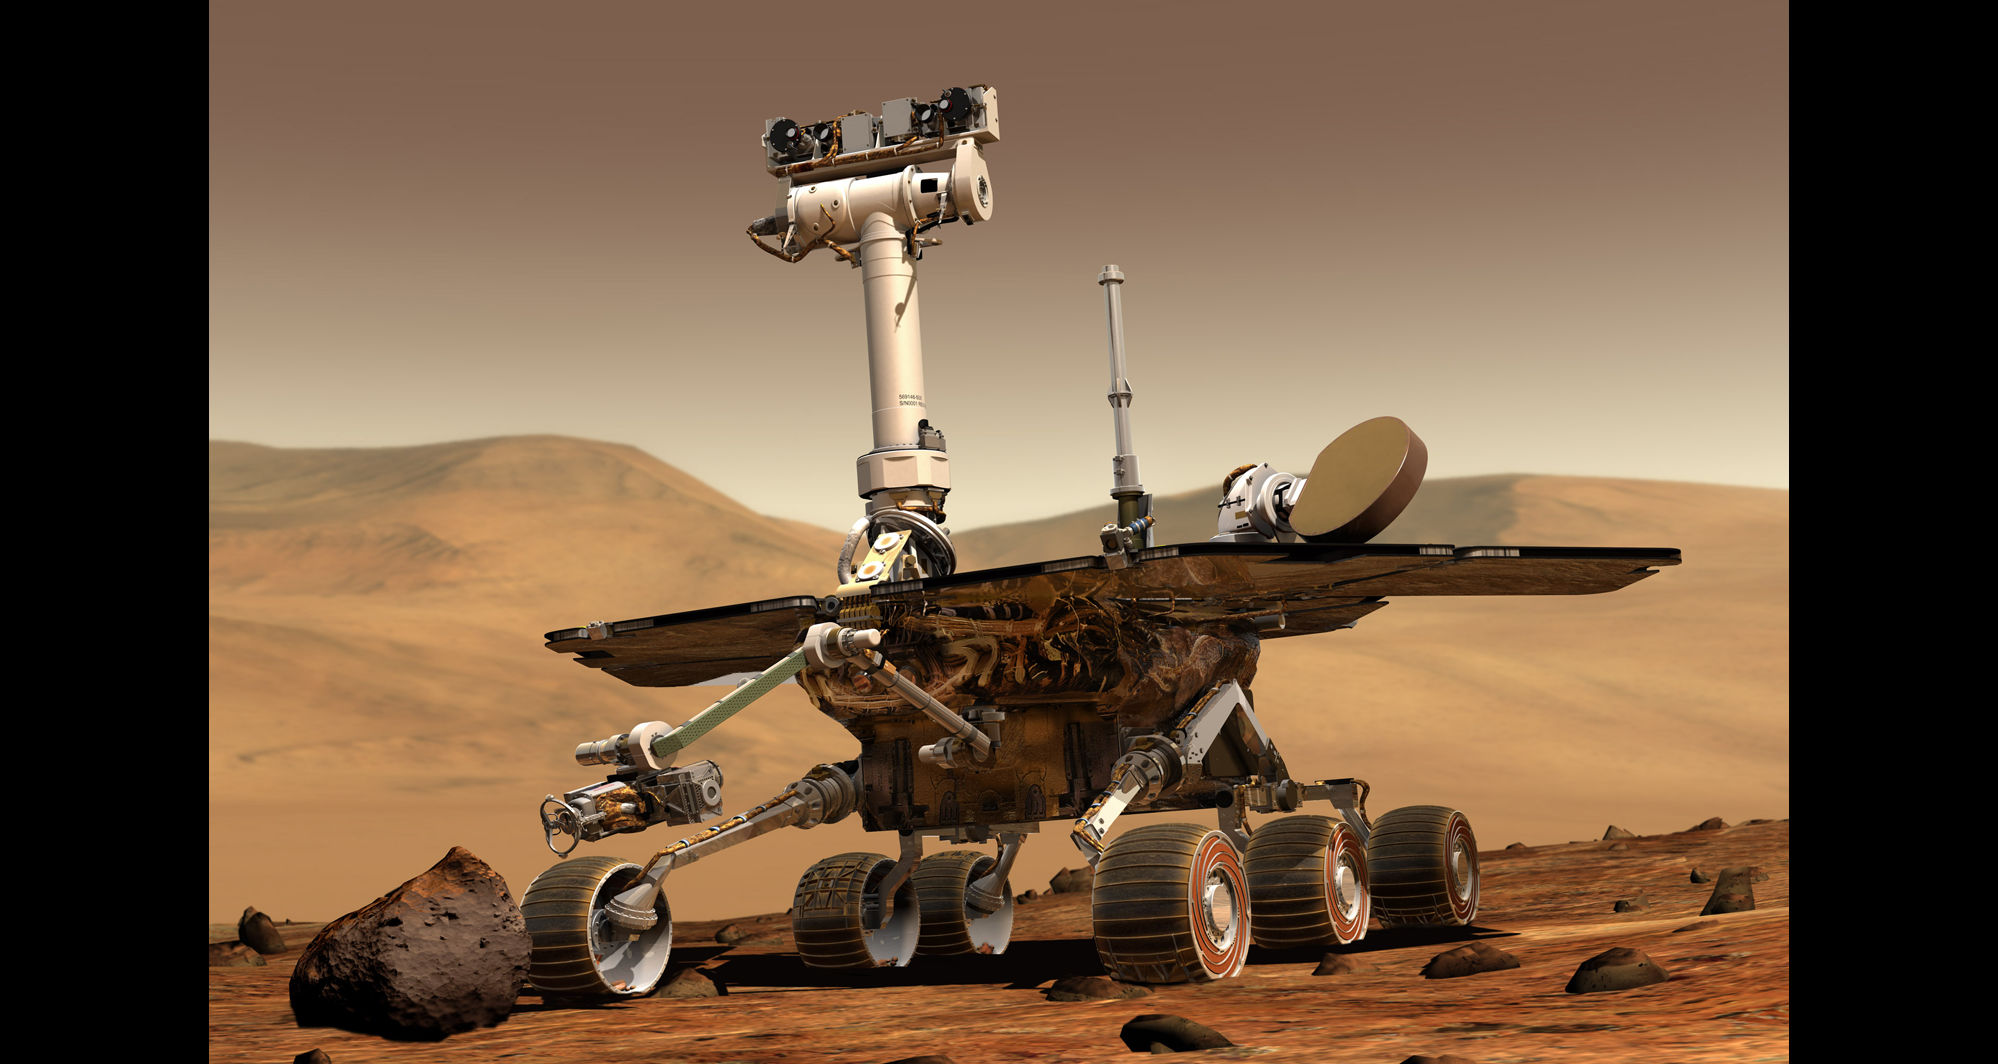 Artwork depicting the rover Opportunity on Mars, its home for the past 15 years and now forevermore. Credit: NASA / JPL / Maas